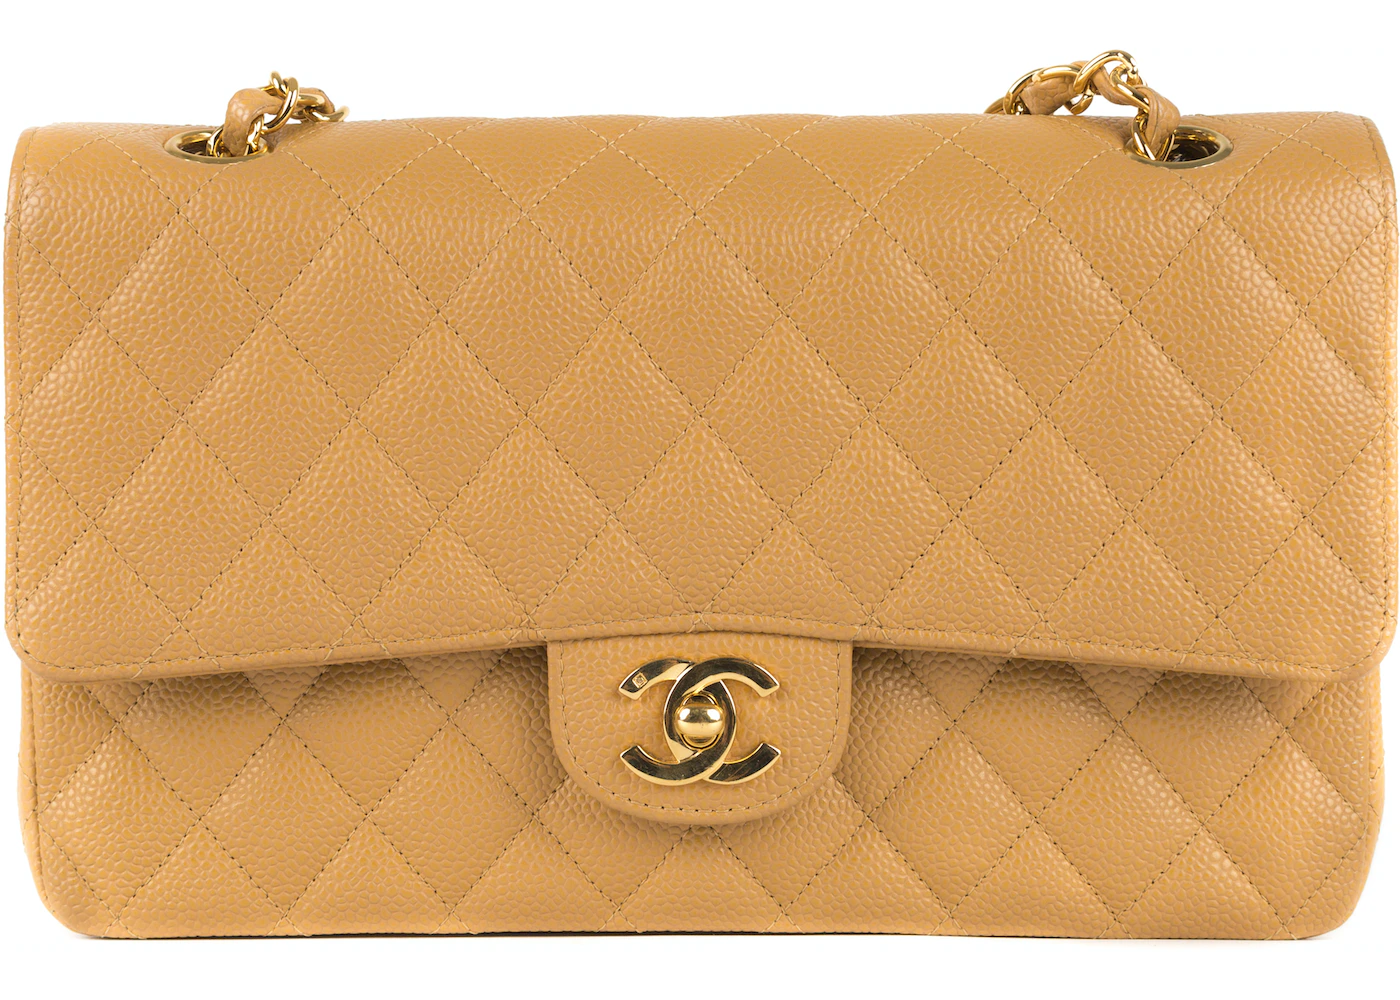 Chanel Classic Double Flap Quilted Caviar Medium Beige in Caviar